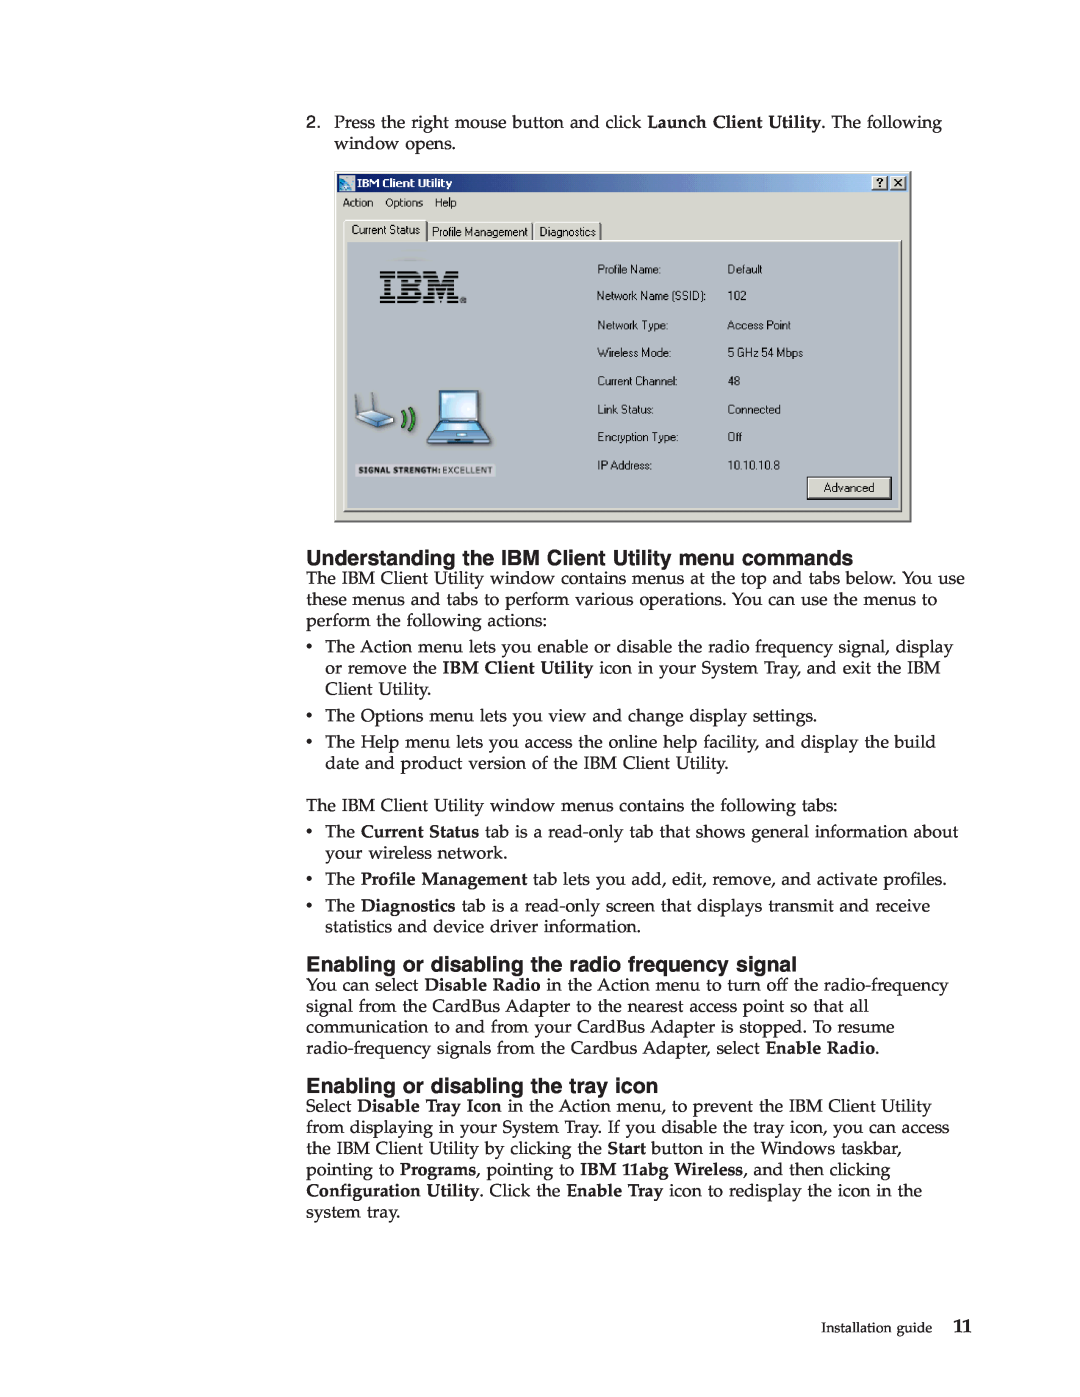 Trust Computer Products IBM 802.11a/b/g Wireless CardBus Adapter manual Understanding the IBM Client Utility menu commands 